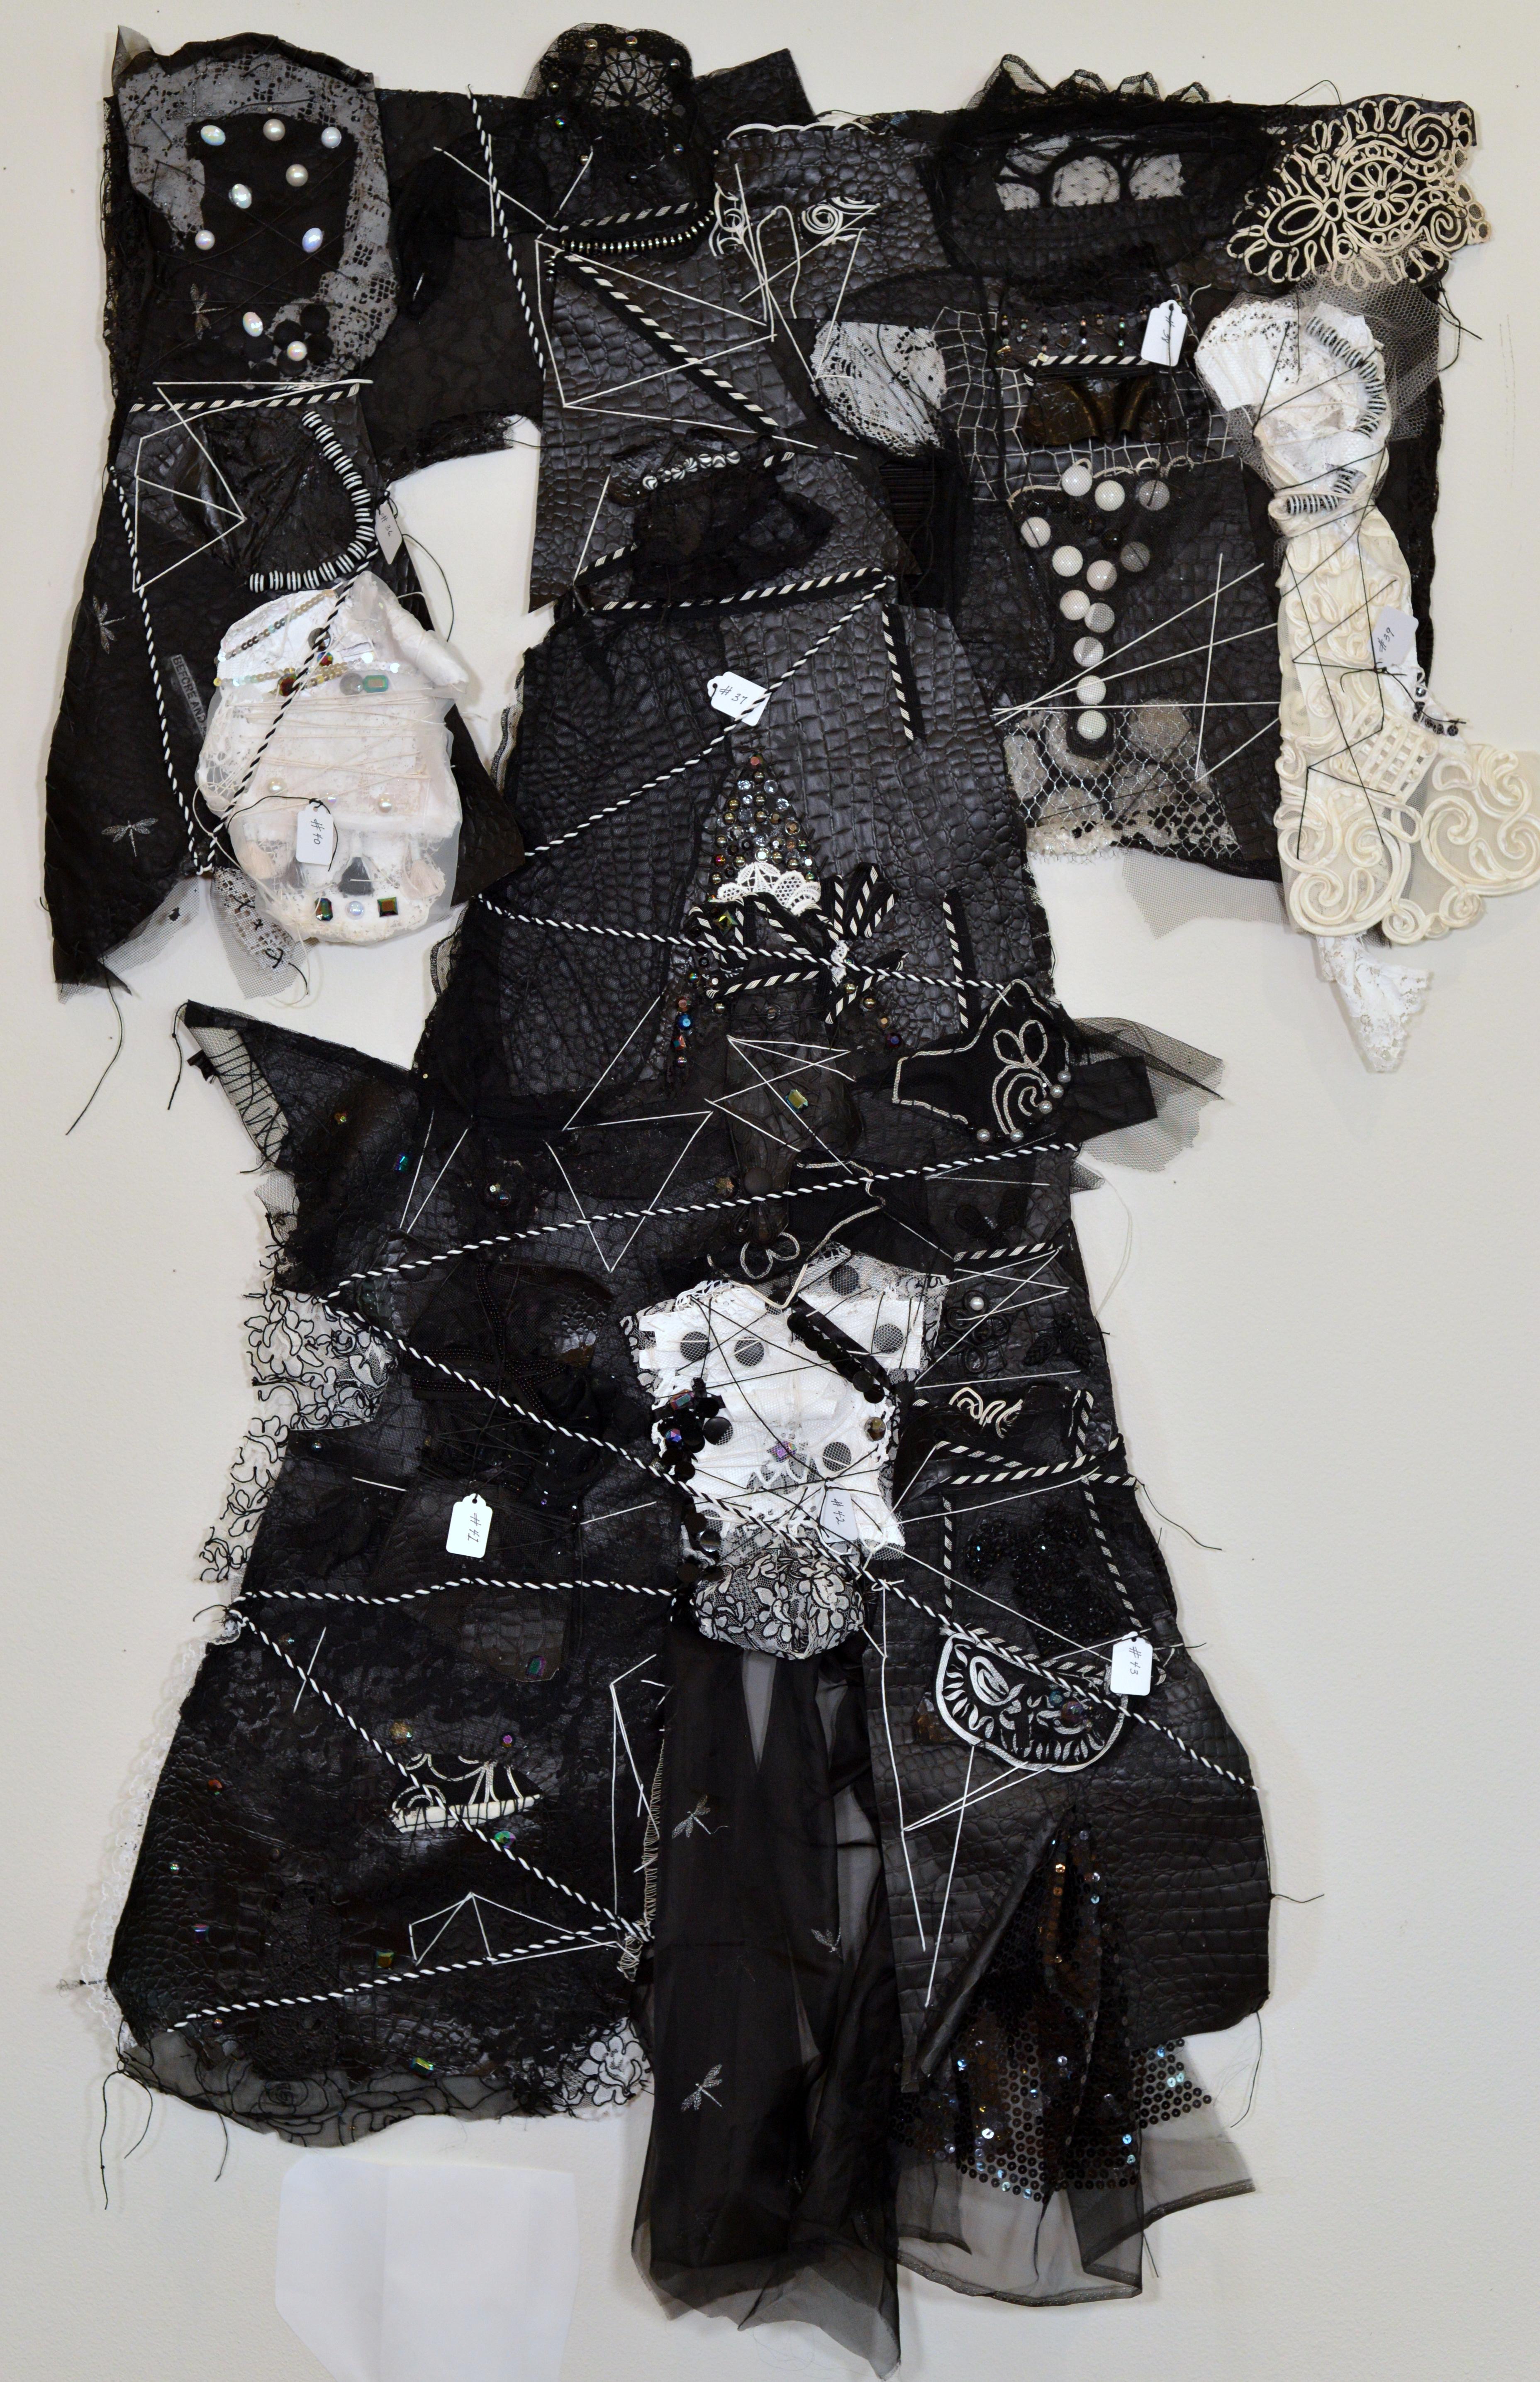 Remnants 5, Medium black and white dress with 7 small dresses sewn on